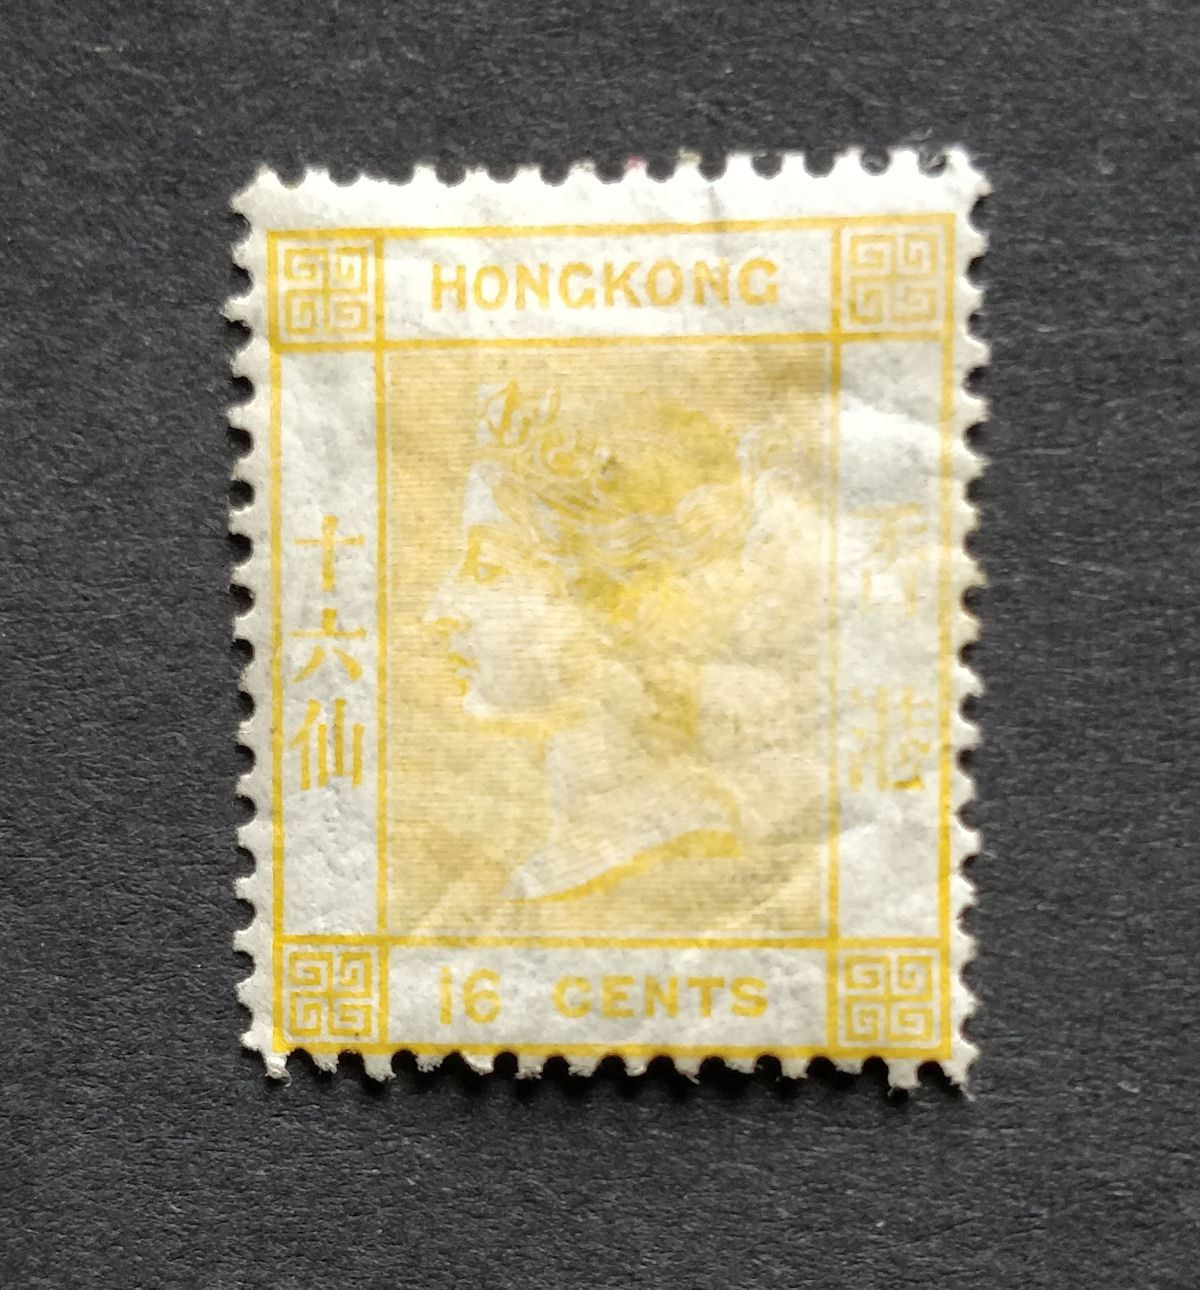 Hong Kong 1877 QV 16c Yellow Mint SG22 cat £2000 VERY CREASED worse than scan